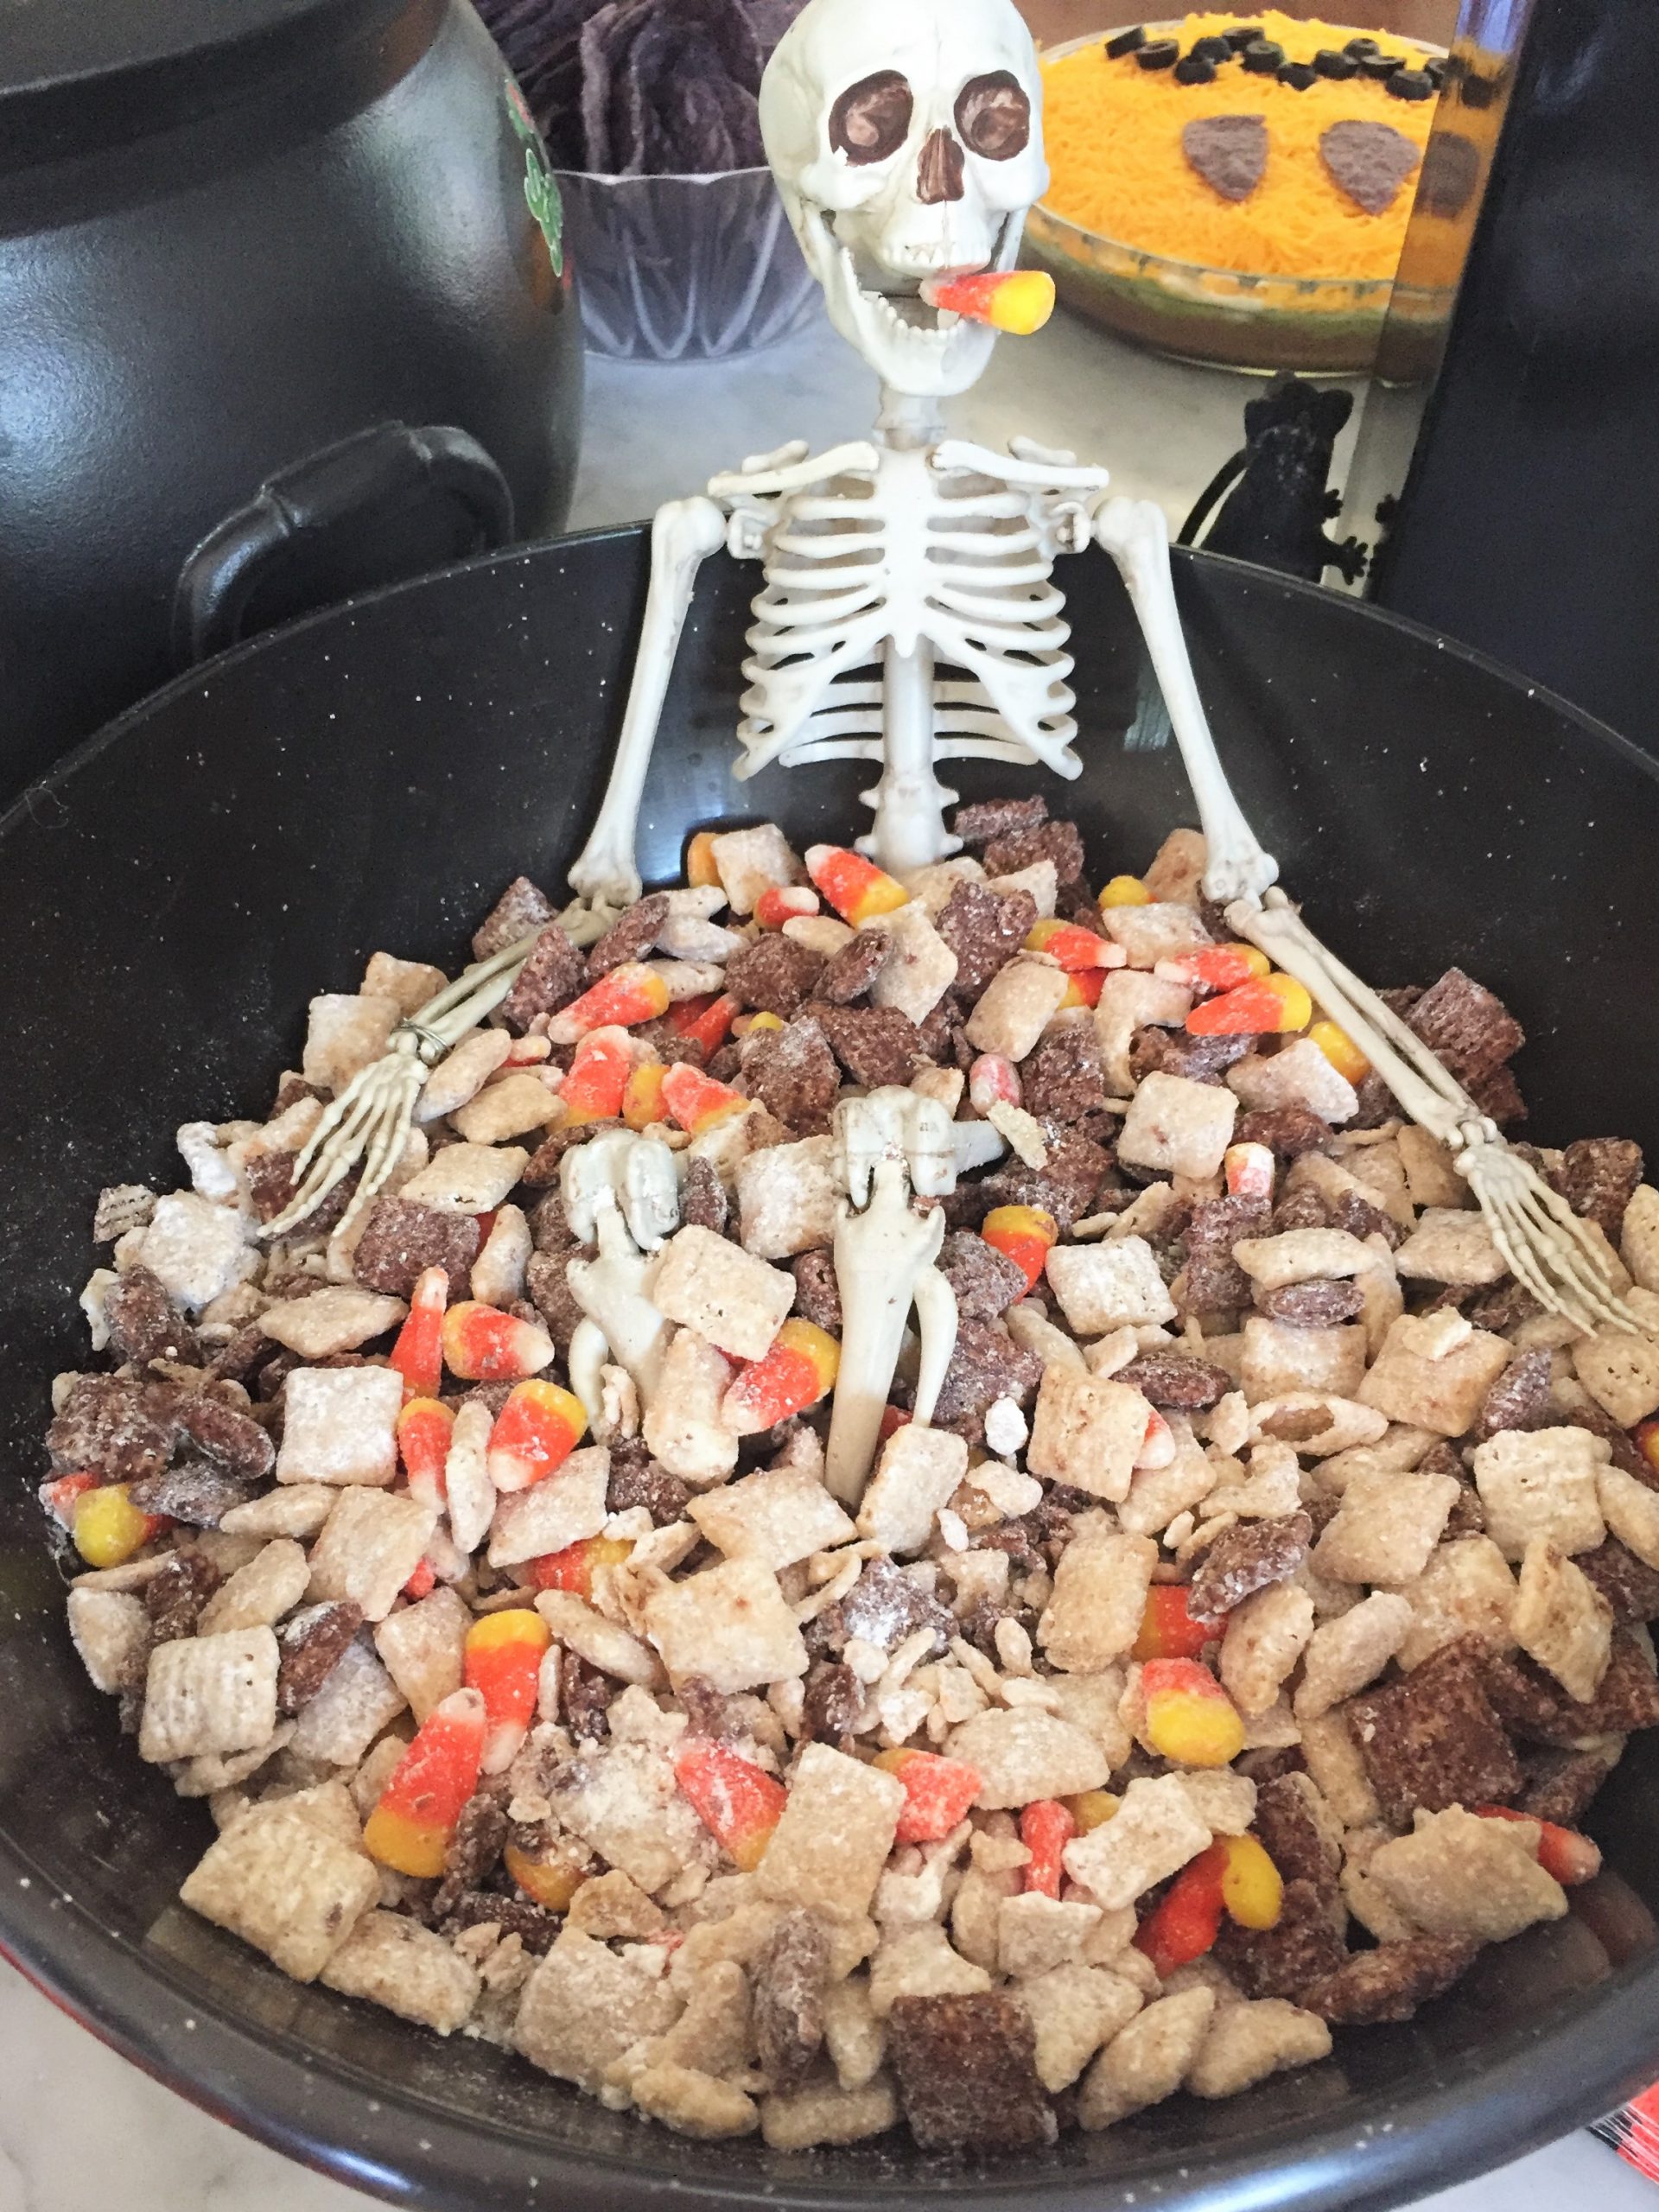 kid-friendly, fun (and not scary) Halloween food ideas for kids